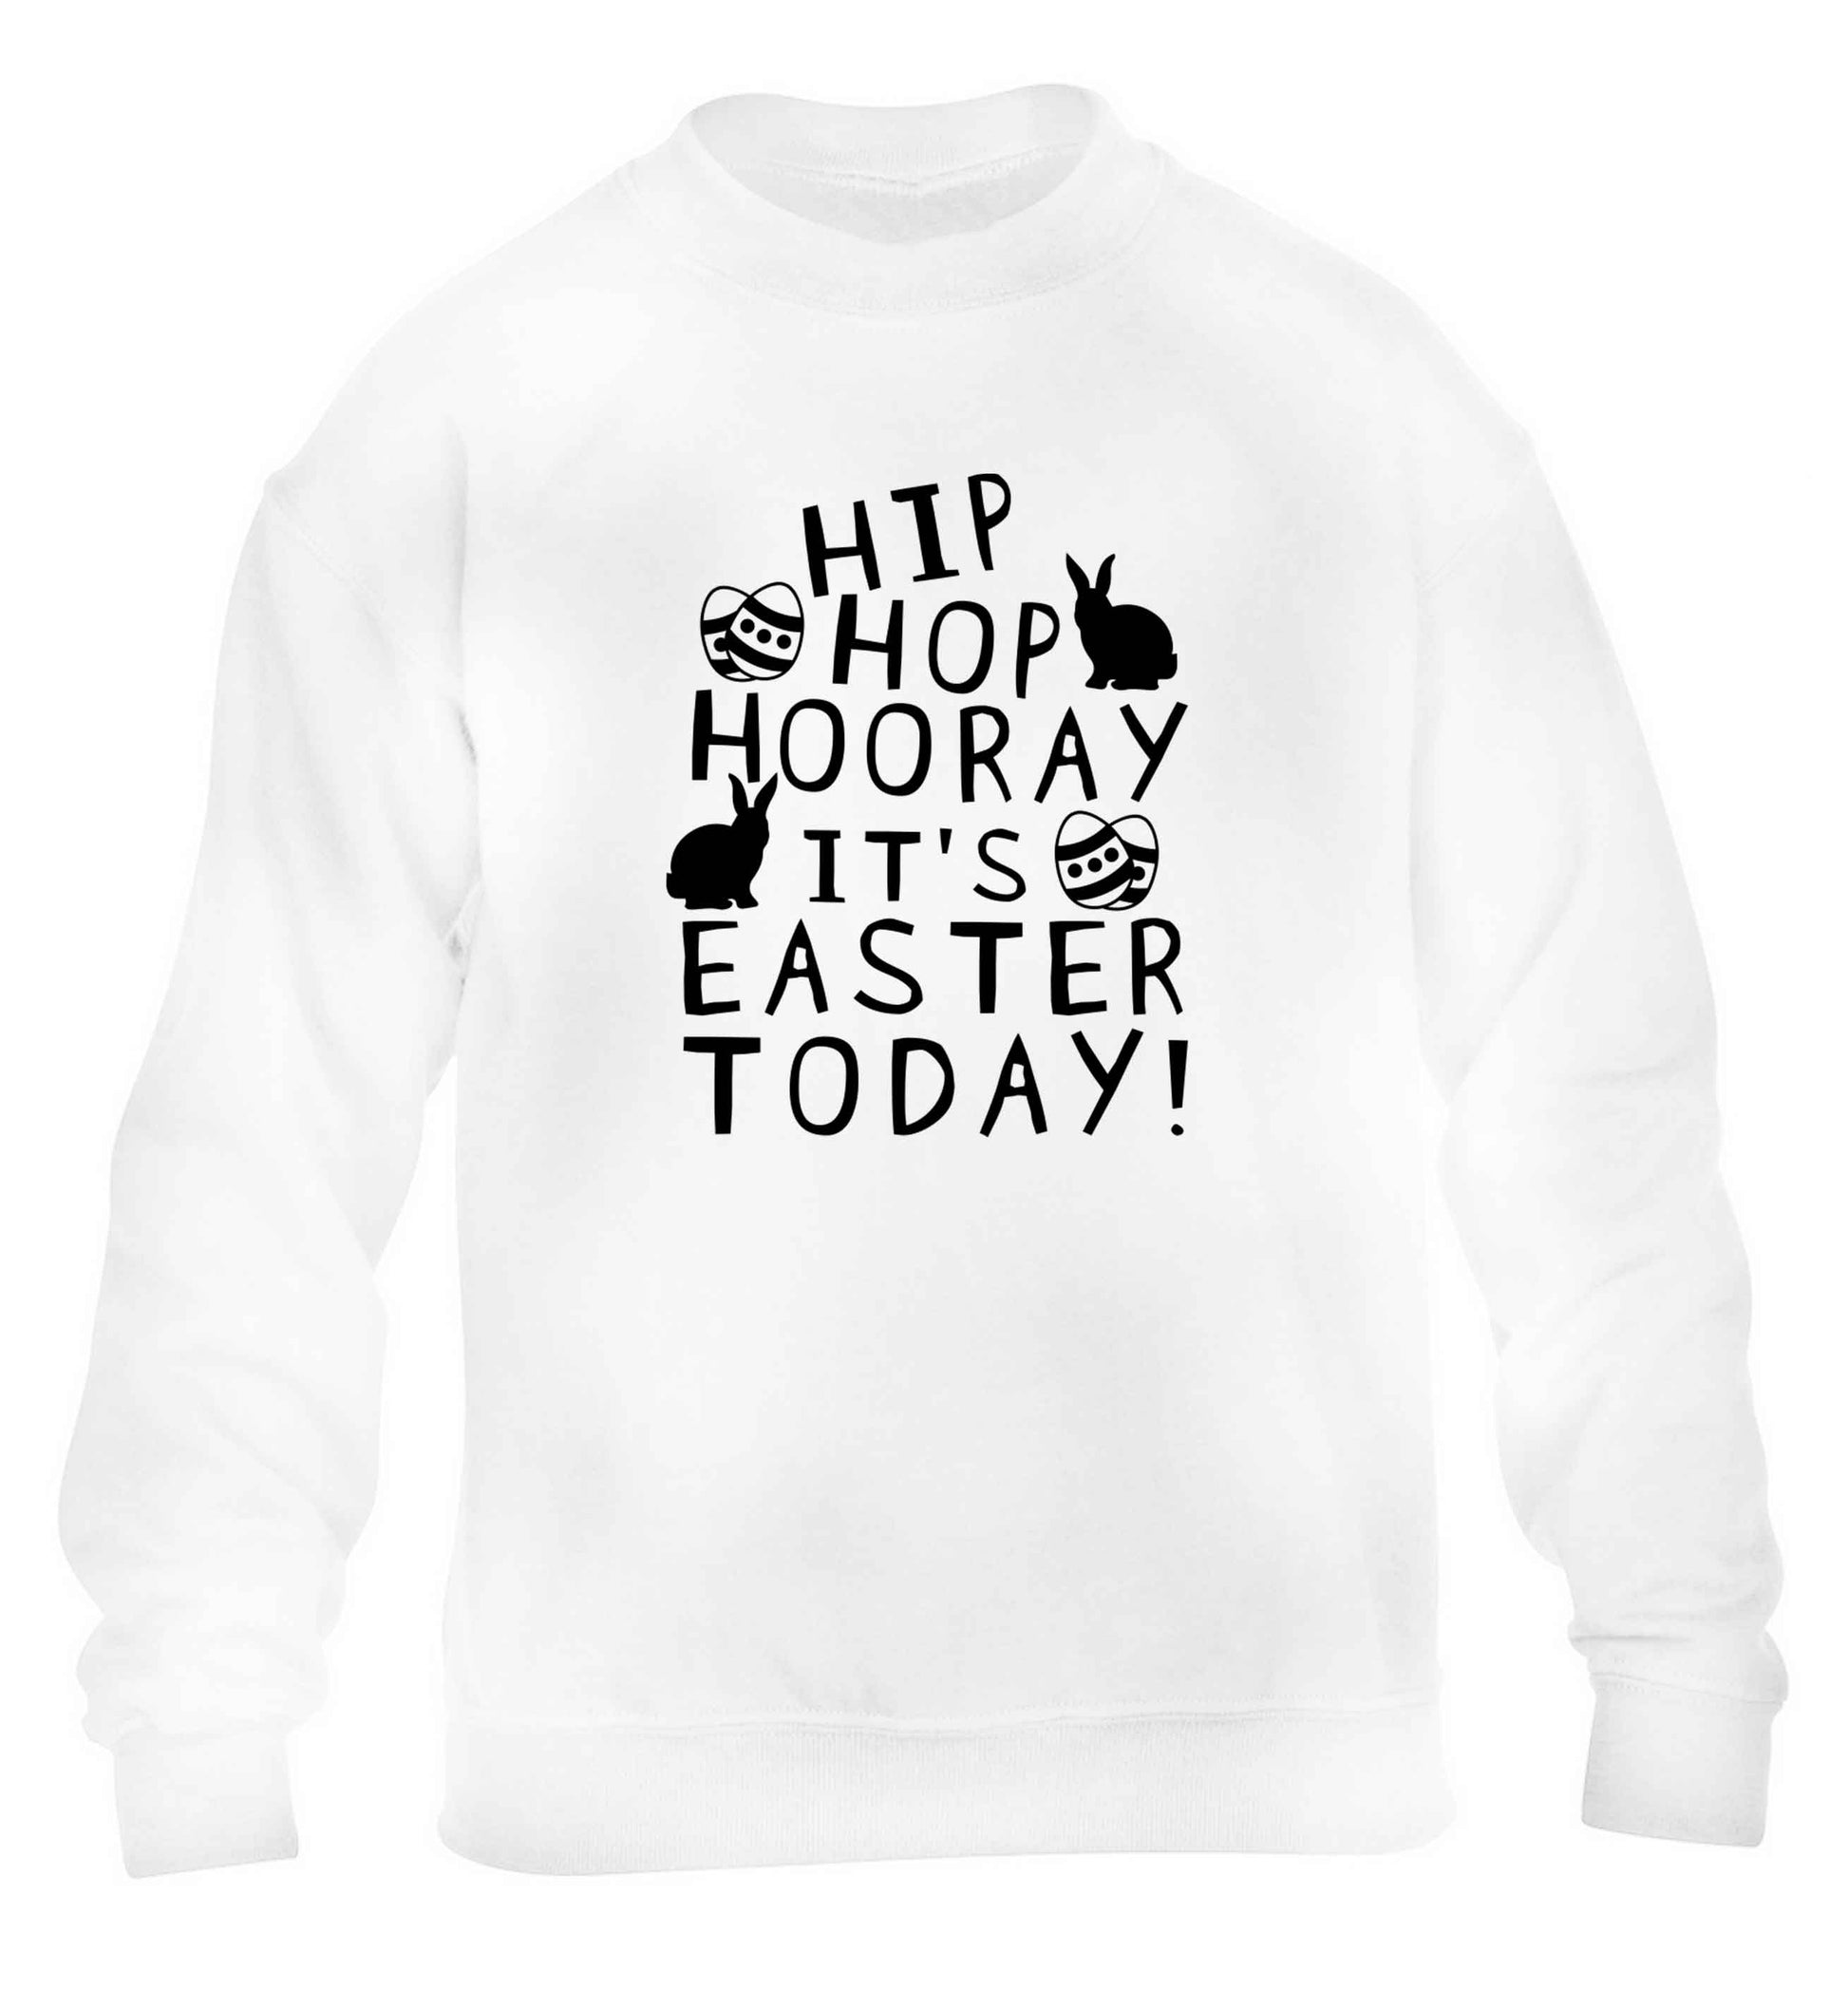 Hip hip hooray it's Easter today! children's white sweater 12-13 Years